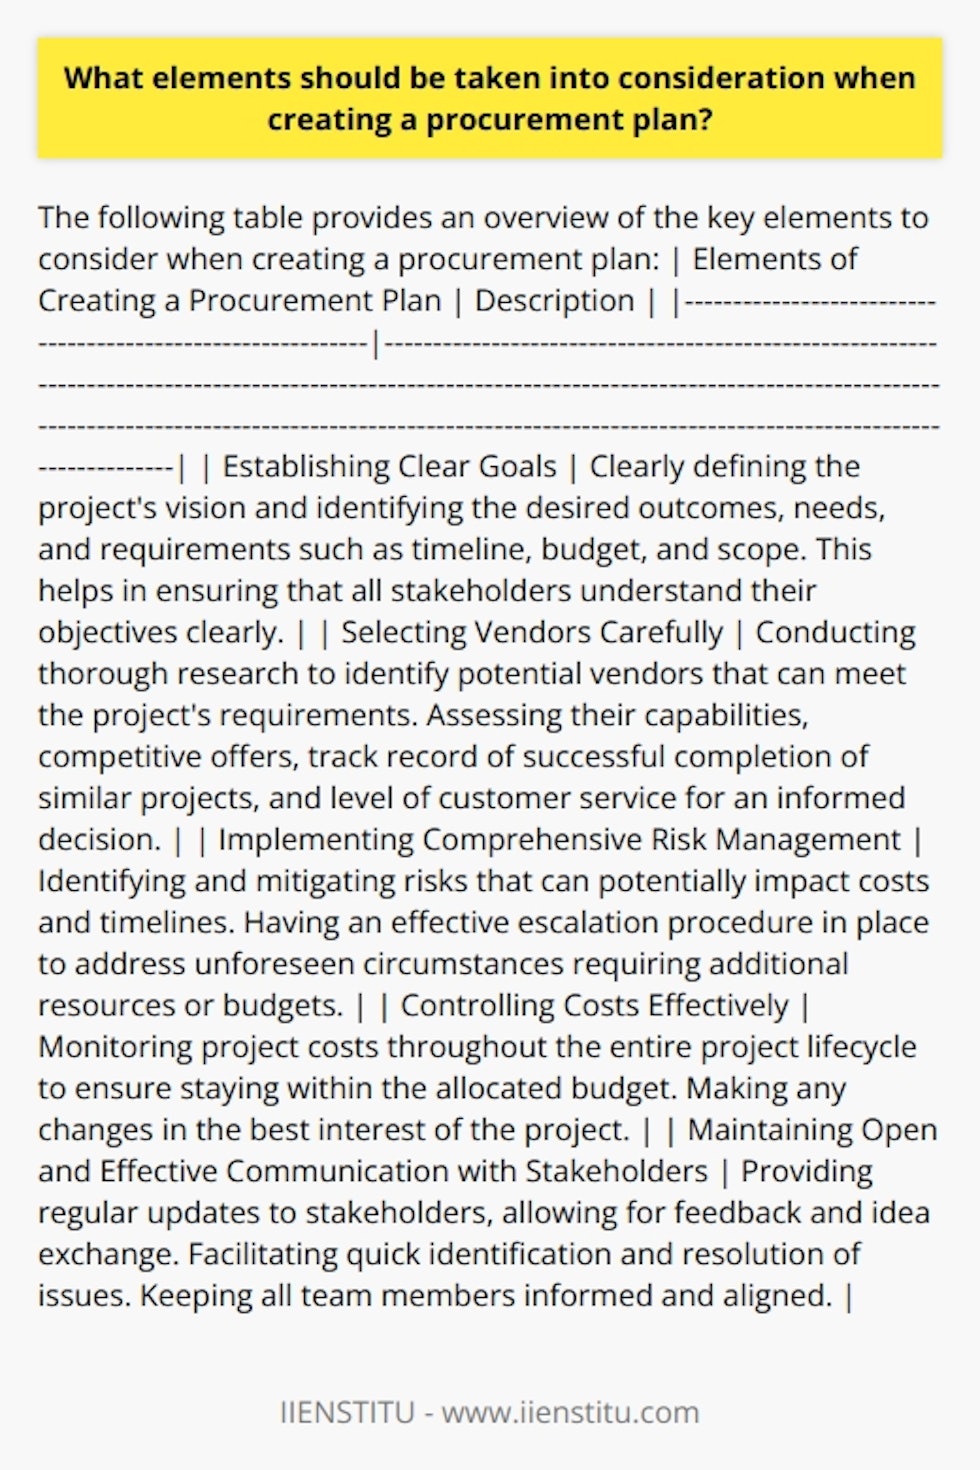 When creating a procurement plan, it is important to consider various elements to ensure its success. These elements include establishing clear goals, selecting vendors carefully, implementing comprehensive risk management, controlling costs effectively, and maintaining open and effective communication with stakeholders.The first element, establishing clear goals, is crucial for the procurement plan. It is essential to clearly define the project's vision and identify the desired outcomes that the plan aims to achieve. By outlining specific needs and requirements, such as timeline, budget, and scope, the procurement strategy can be built upon a solid foundation. This helps in ensuring that all stakeholders understand their objectives clearly.The second element is the proper selection of vendors. Thorough research should be conducted to identify potential vendors that can meet the project's requirements. Assessing their capabilities and competitive offers is necessary before making a selection. Moreover, evaluating vendors' track record of successful completion of similar projects and the level of their customer service is vital in making an informed decision.The third element is comprehensive risk management. Identifying and mitigating risks, considering their potential impact on costs and timelines, is essential for a successful procurement plan. Additionally, an effective escalation procedure should be in place to address any unforeseen circumstances that may require additional resources or budgets.Adequate cost control is the fourth element to consider when creating a procurement plan. Monitoring project costs throughout the entire project lifecycle is necessary to ensure the project stays within the allocated budget. Any changes made should be done in the best interest of the project.Finally, effective communication between all stakeholders plays a critical role in the success of the procurement plan. Regular updates should be provided to stakeholders throughout the project lifecycle, allowing them to provide feedback and ideas. This ensures that any issues are quickly identified and addressed, and all team members stay informed and aligned.In conclusion, when creating a procurement plan, it is important to focus on establishing clear goals, selecting vendors carefully, implementing comprehensive risk management, controlling costs effectively, and maintaining open and effective communication with stakeholders. By considering these elements, the procurement plan can be designed to achieve its intended objectives effectively.